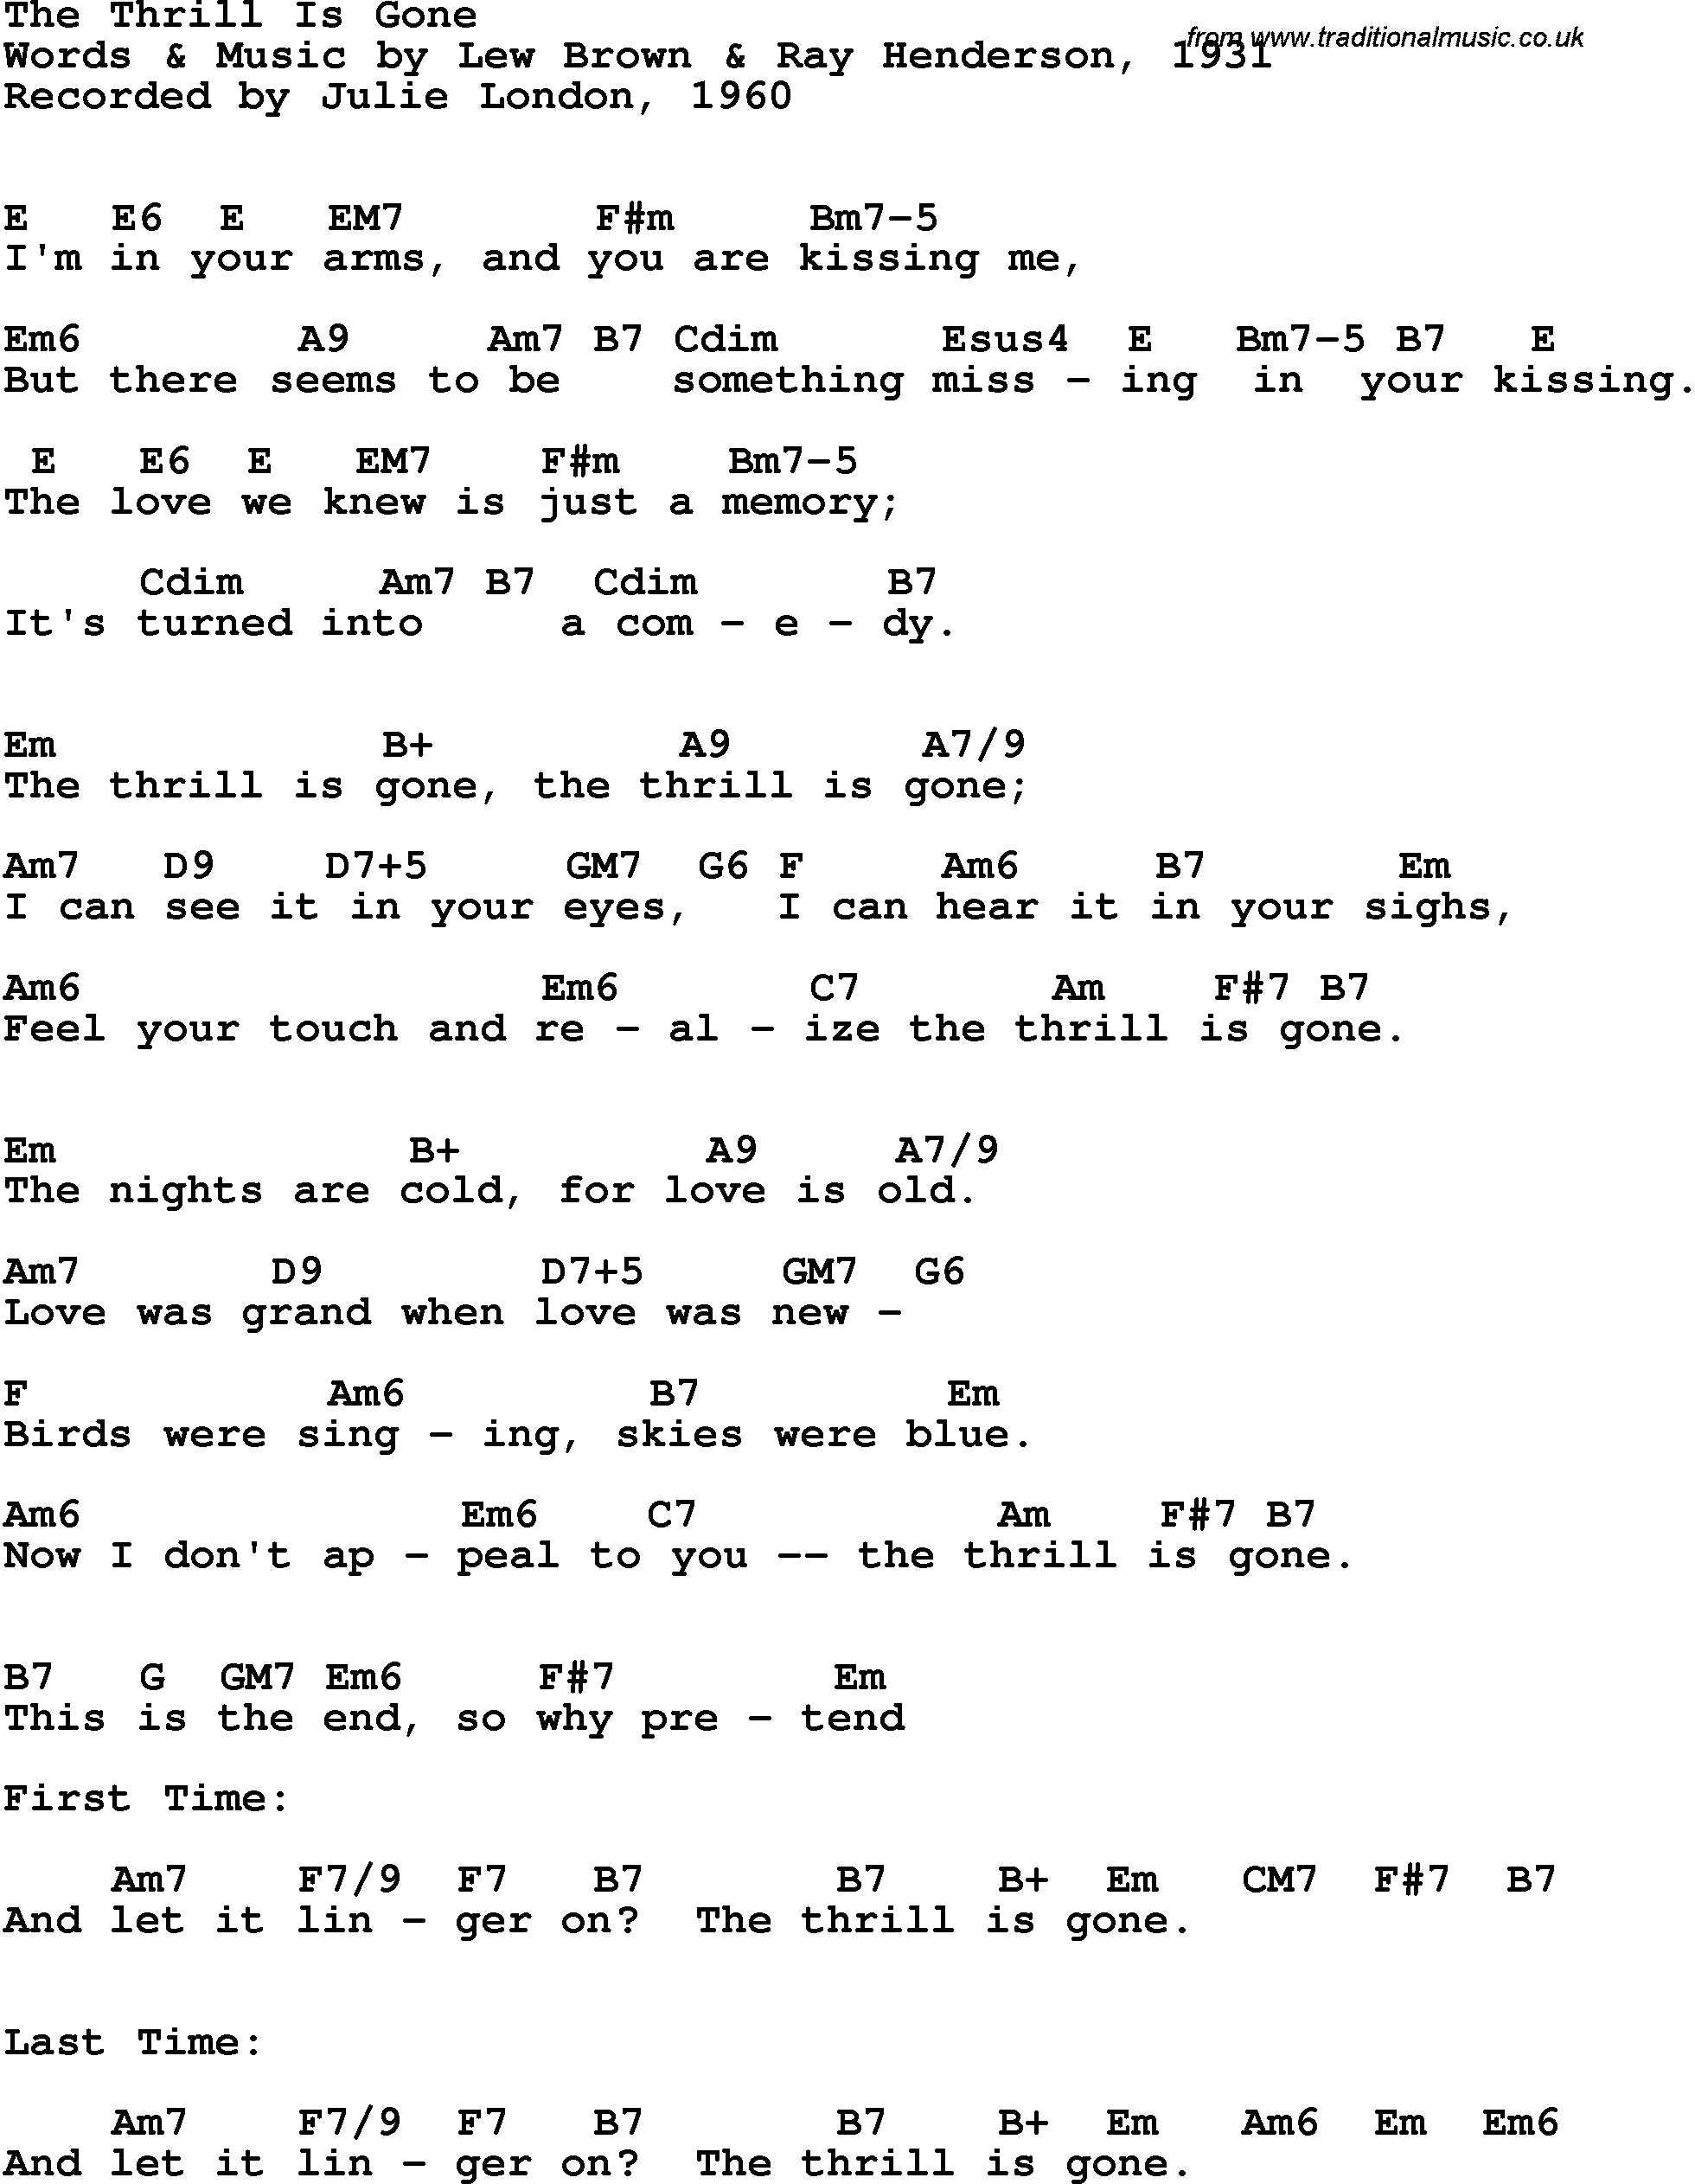 Song Lyrics with guitar chords for Thrill Is Gone, The - Julie London, 1960